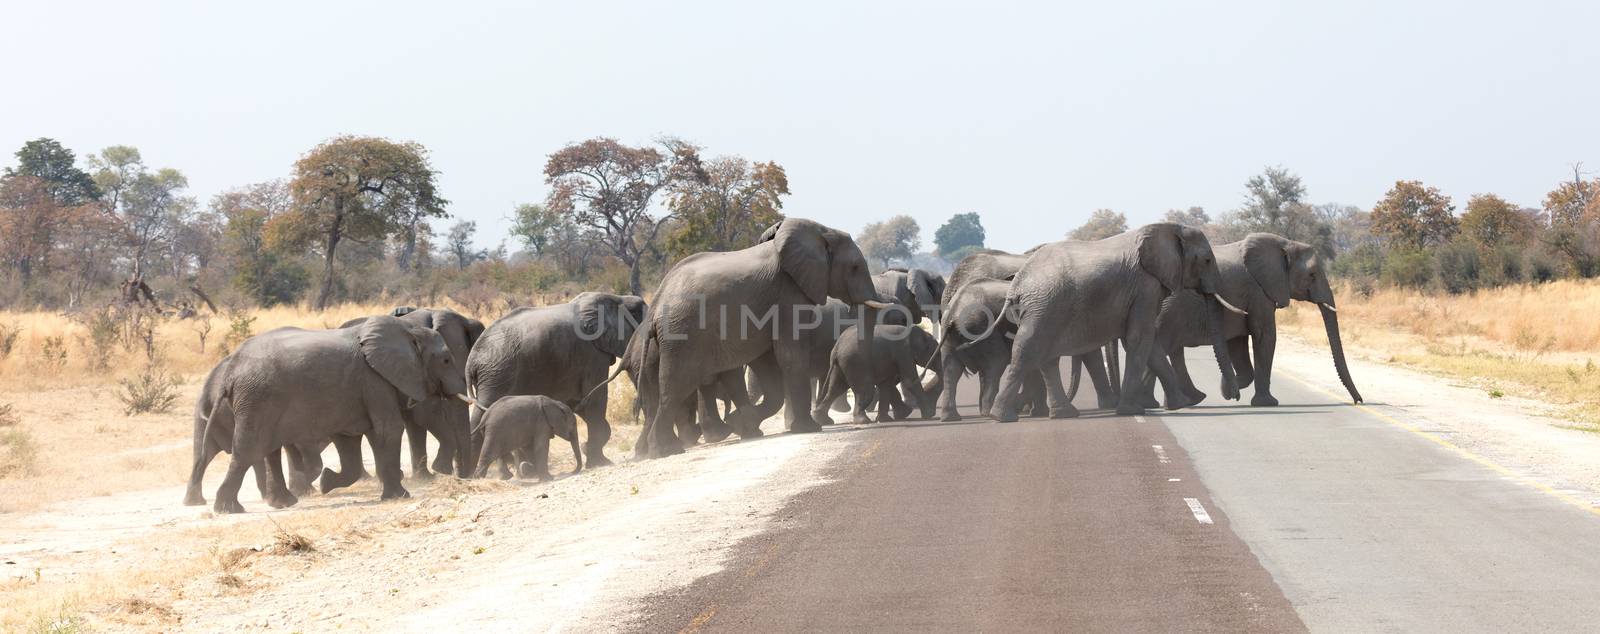 Large elephant family crossing a road - Namibia